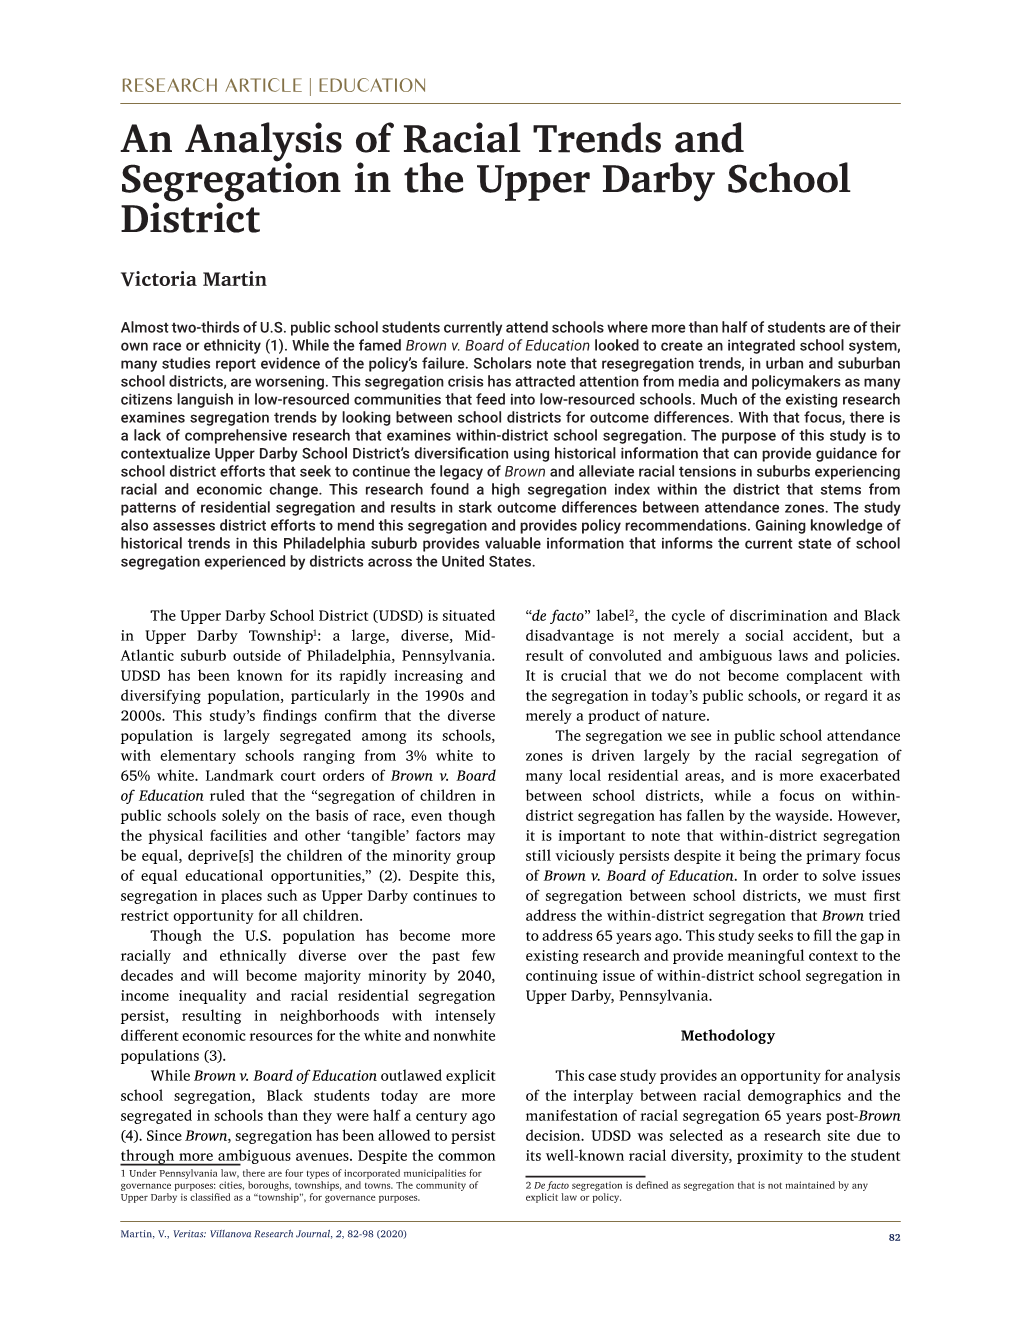 An Analysis of Racial Trends and Segregation in the Upper Darby School District